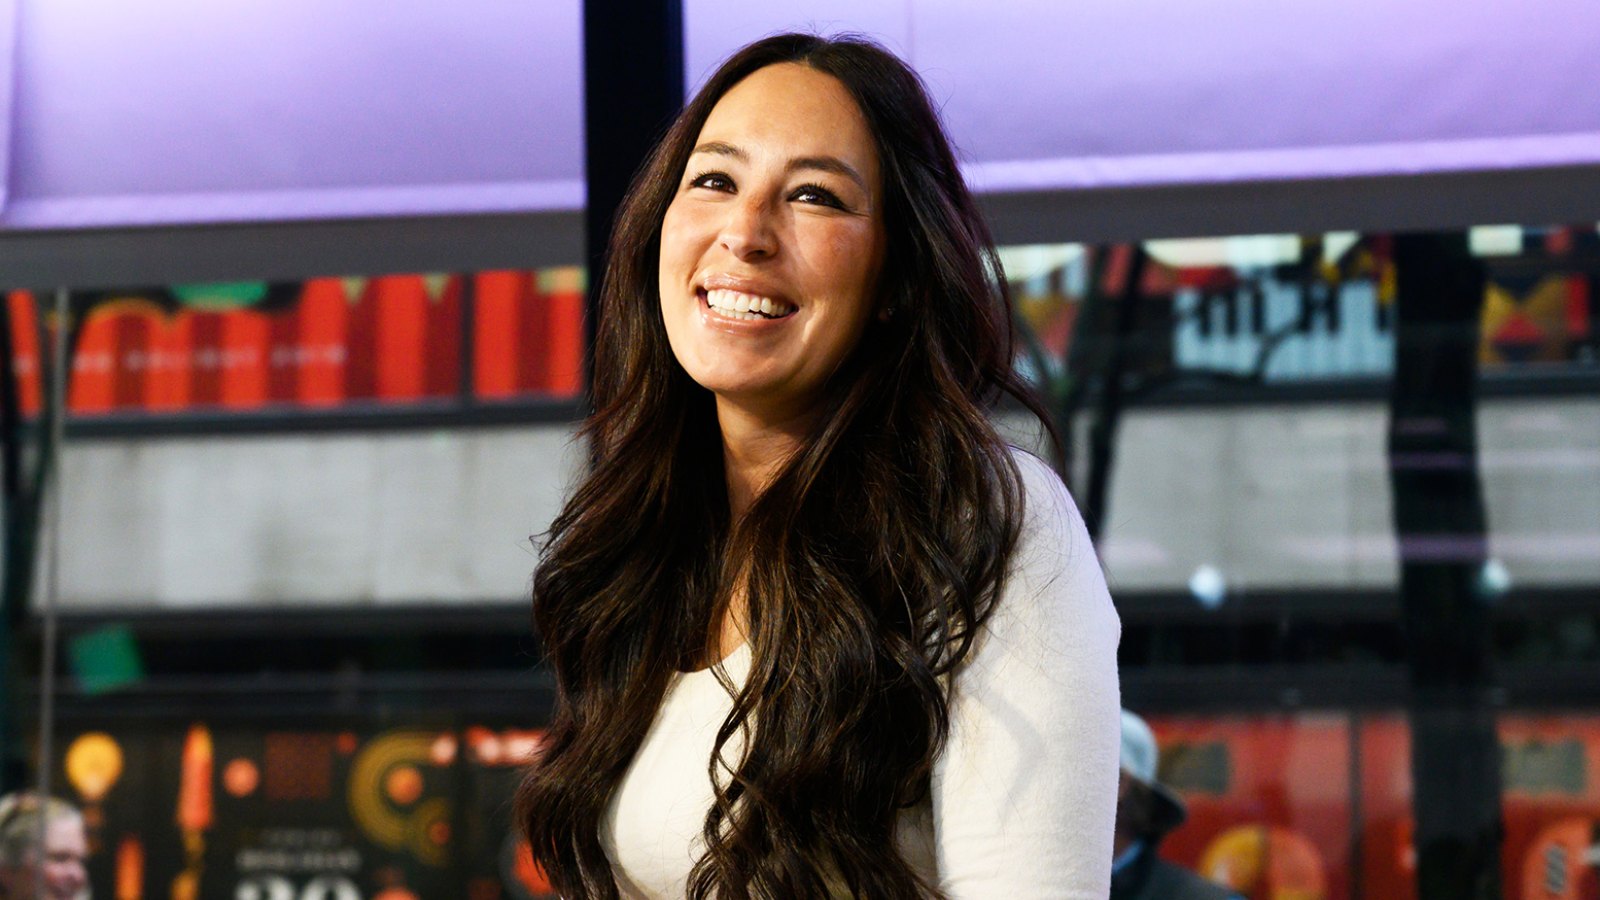 People Are Flipping Out Over Joanna Gaines' Christmas Photo